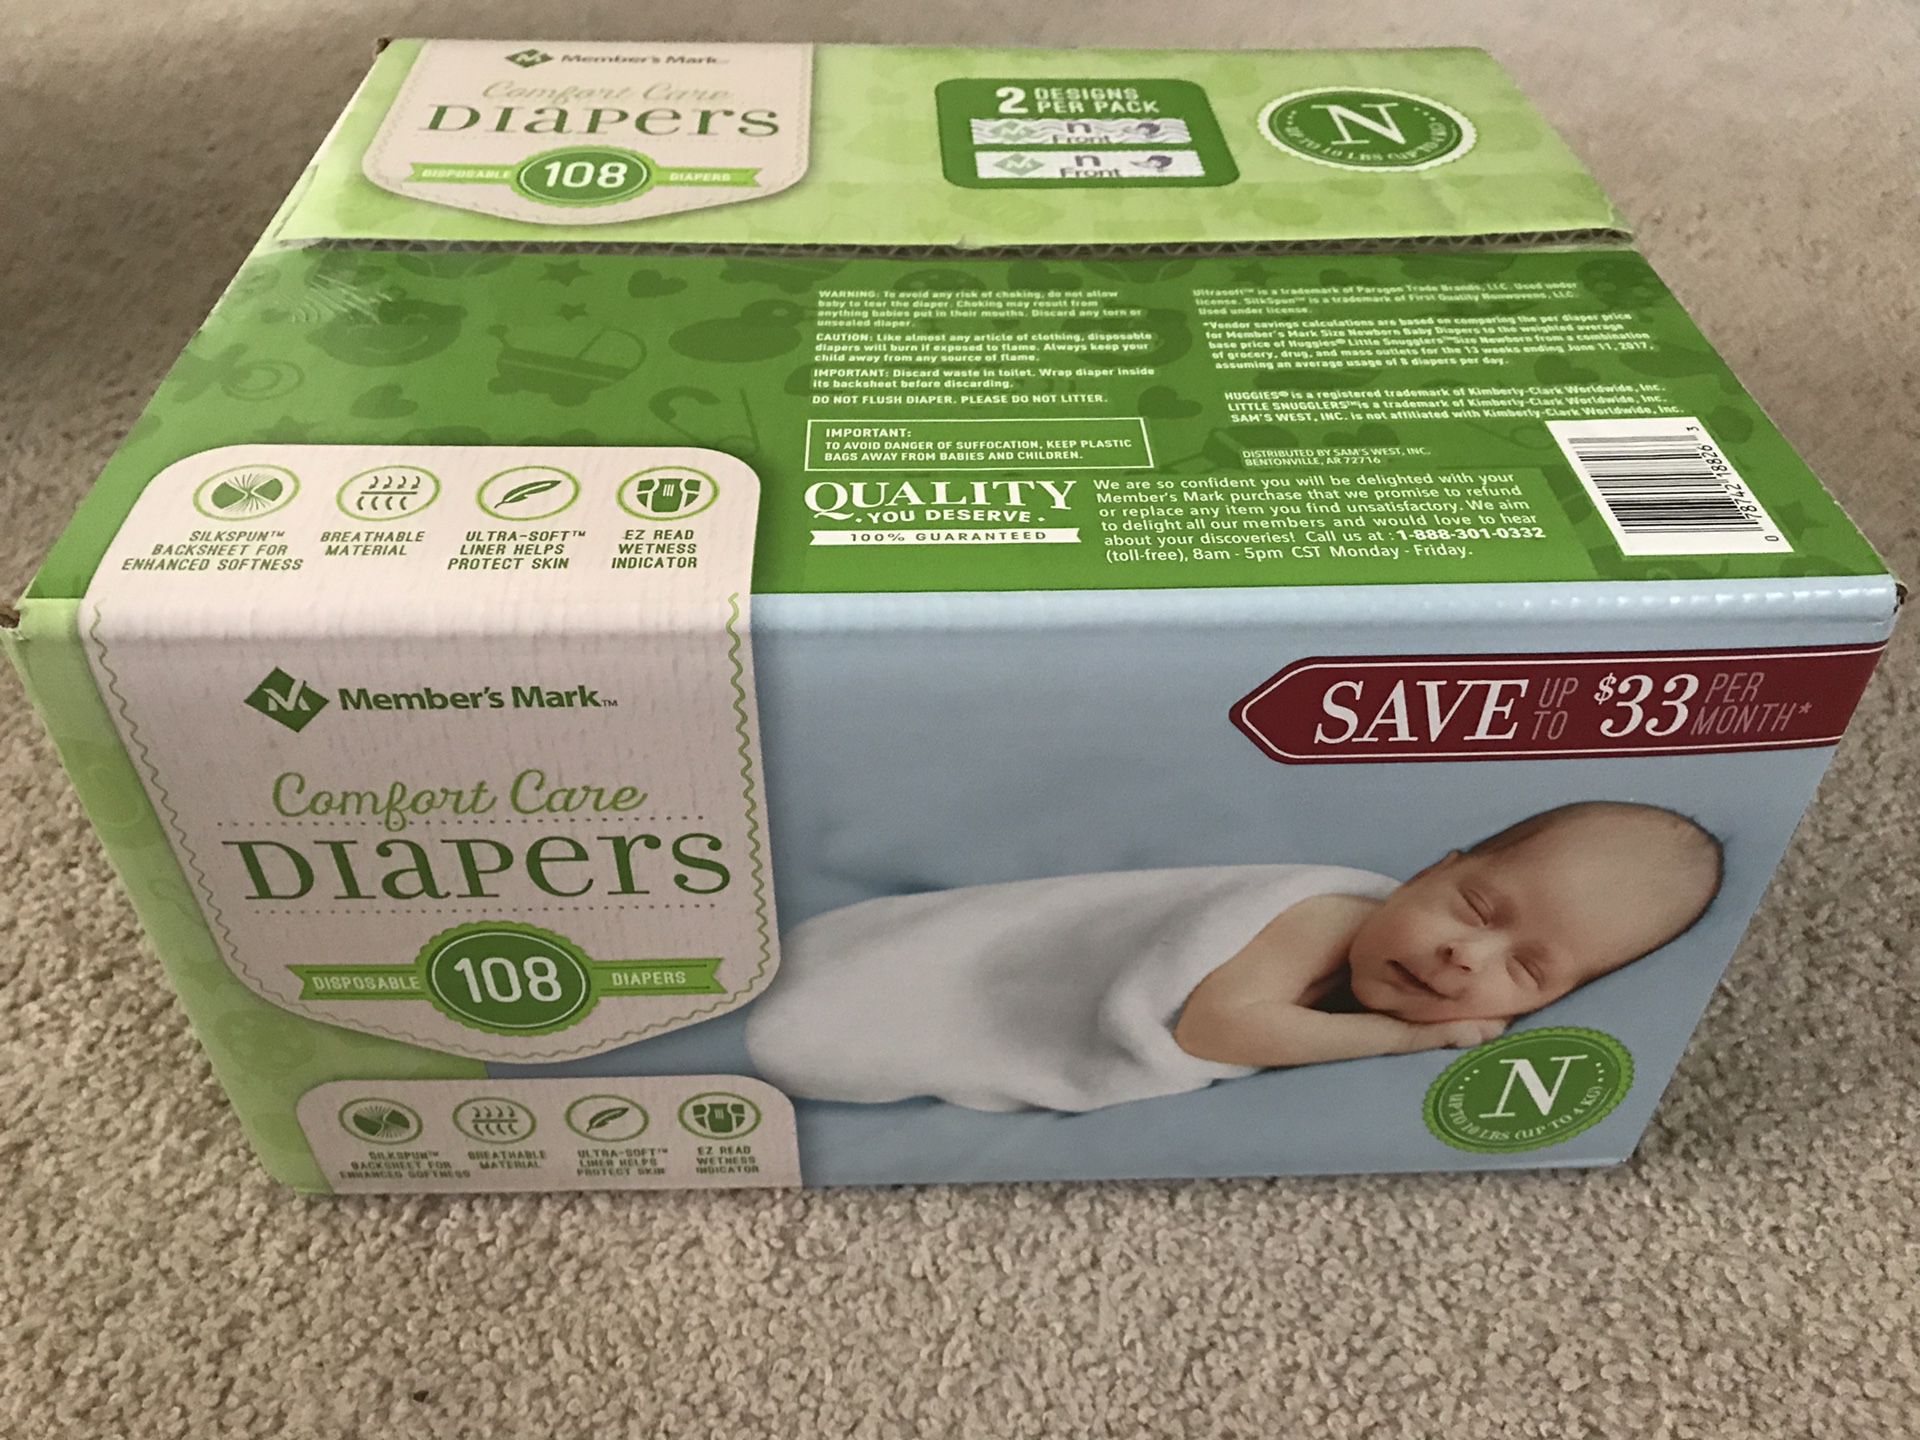 Comfort Care Diapers ( up to 10 lbs) Newborns 108 counts